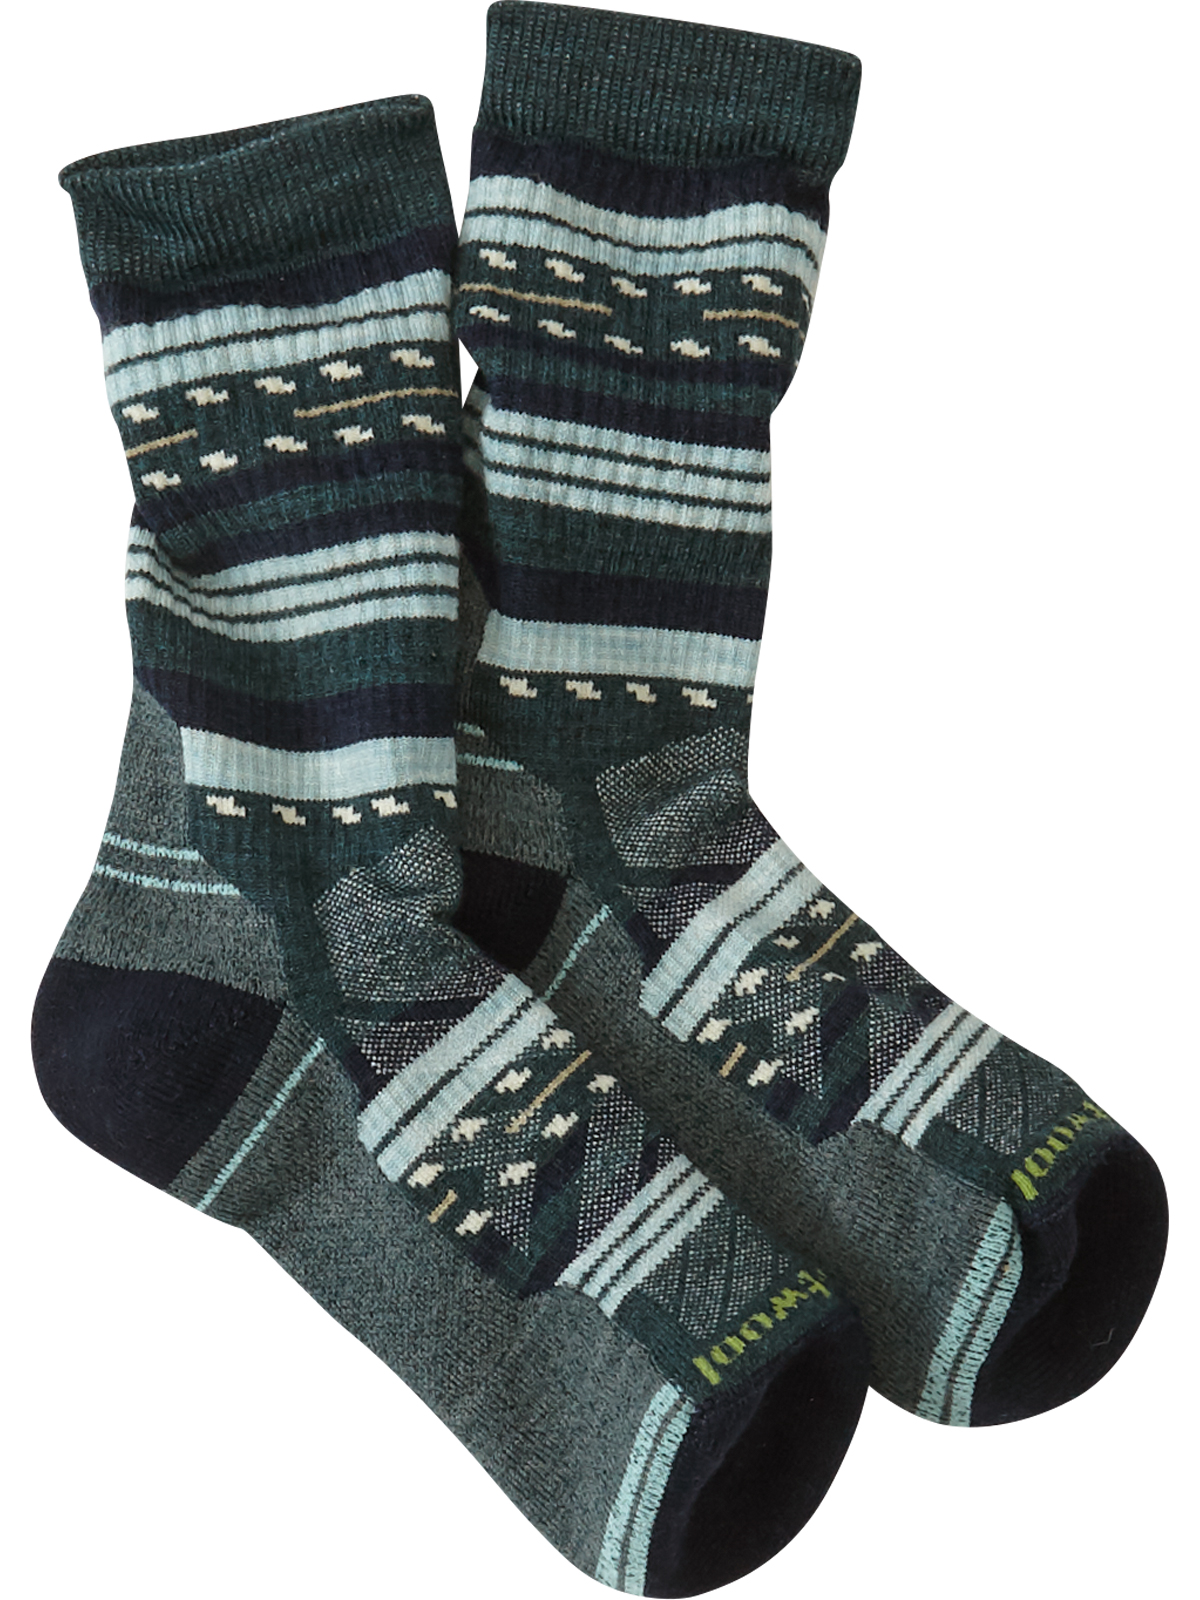 Smartwool hiking socks. The one on the left was purchased in 1999, totally  worth $25 per pair. : r/BuyItForLife